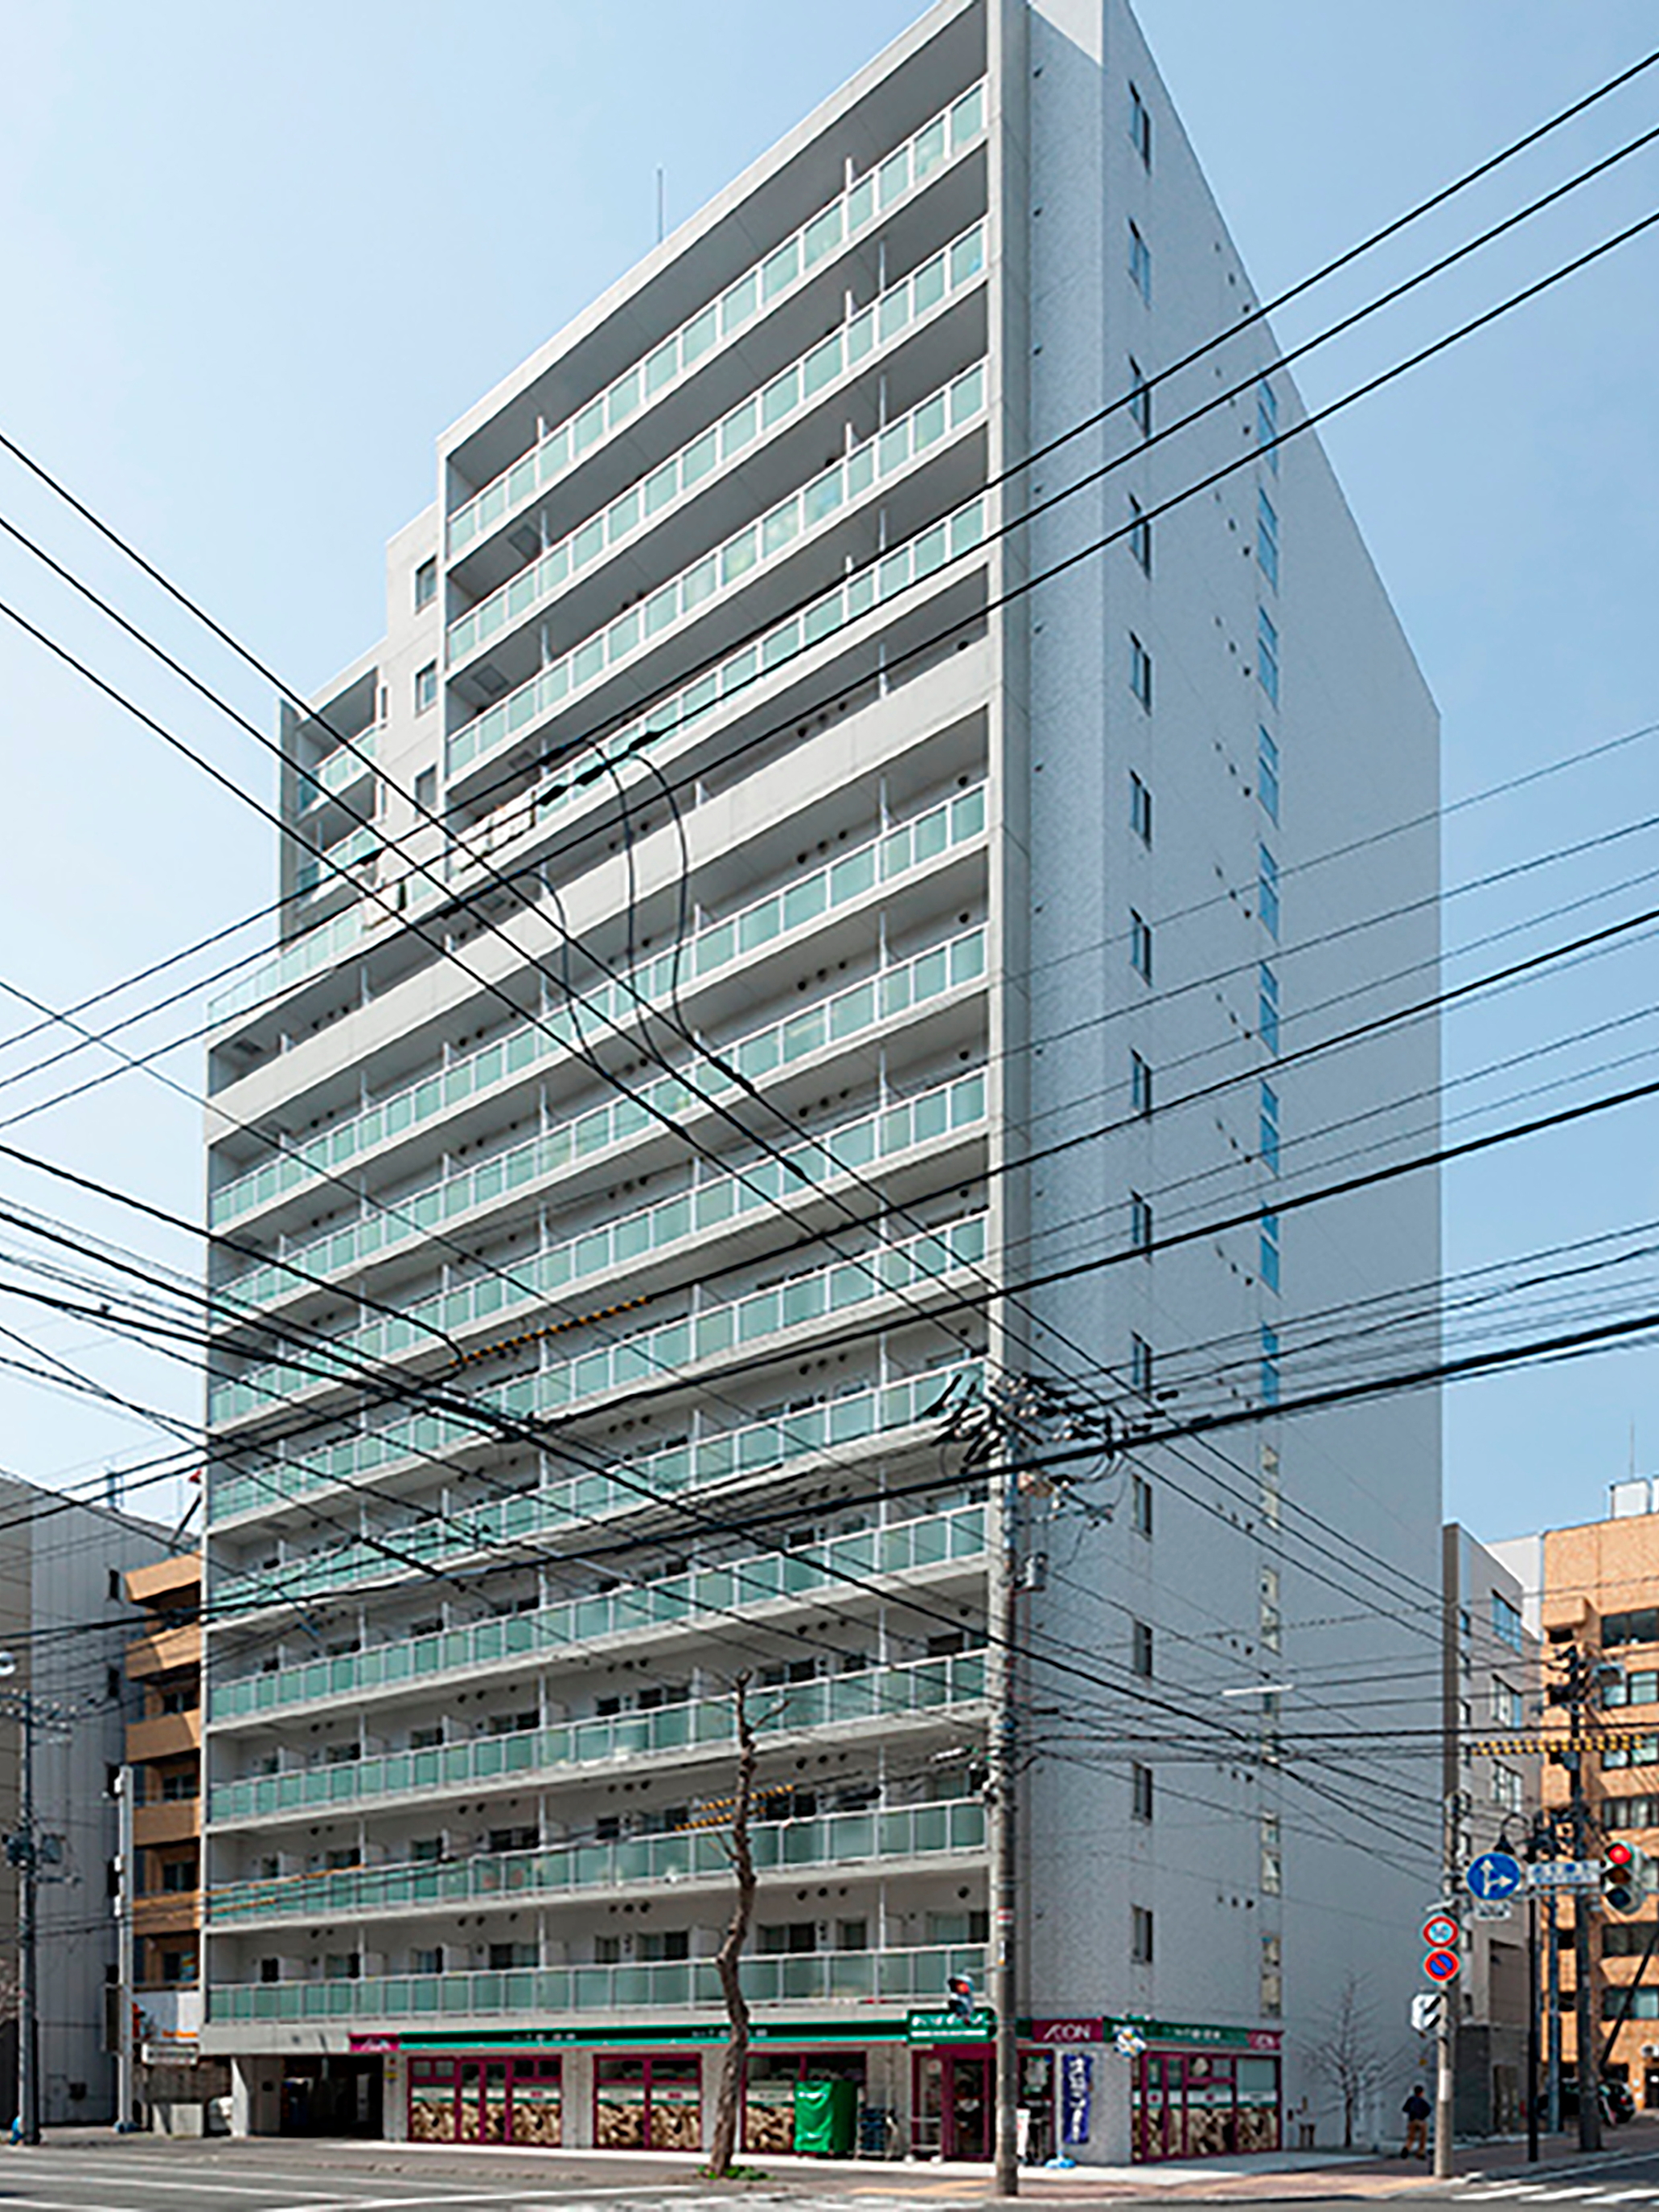 City Court Kita 1 jo is one of the three freehold rental housing properties in central Sapporo that Ascott Residence Trust is buying. Click to enlarge.